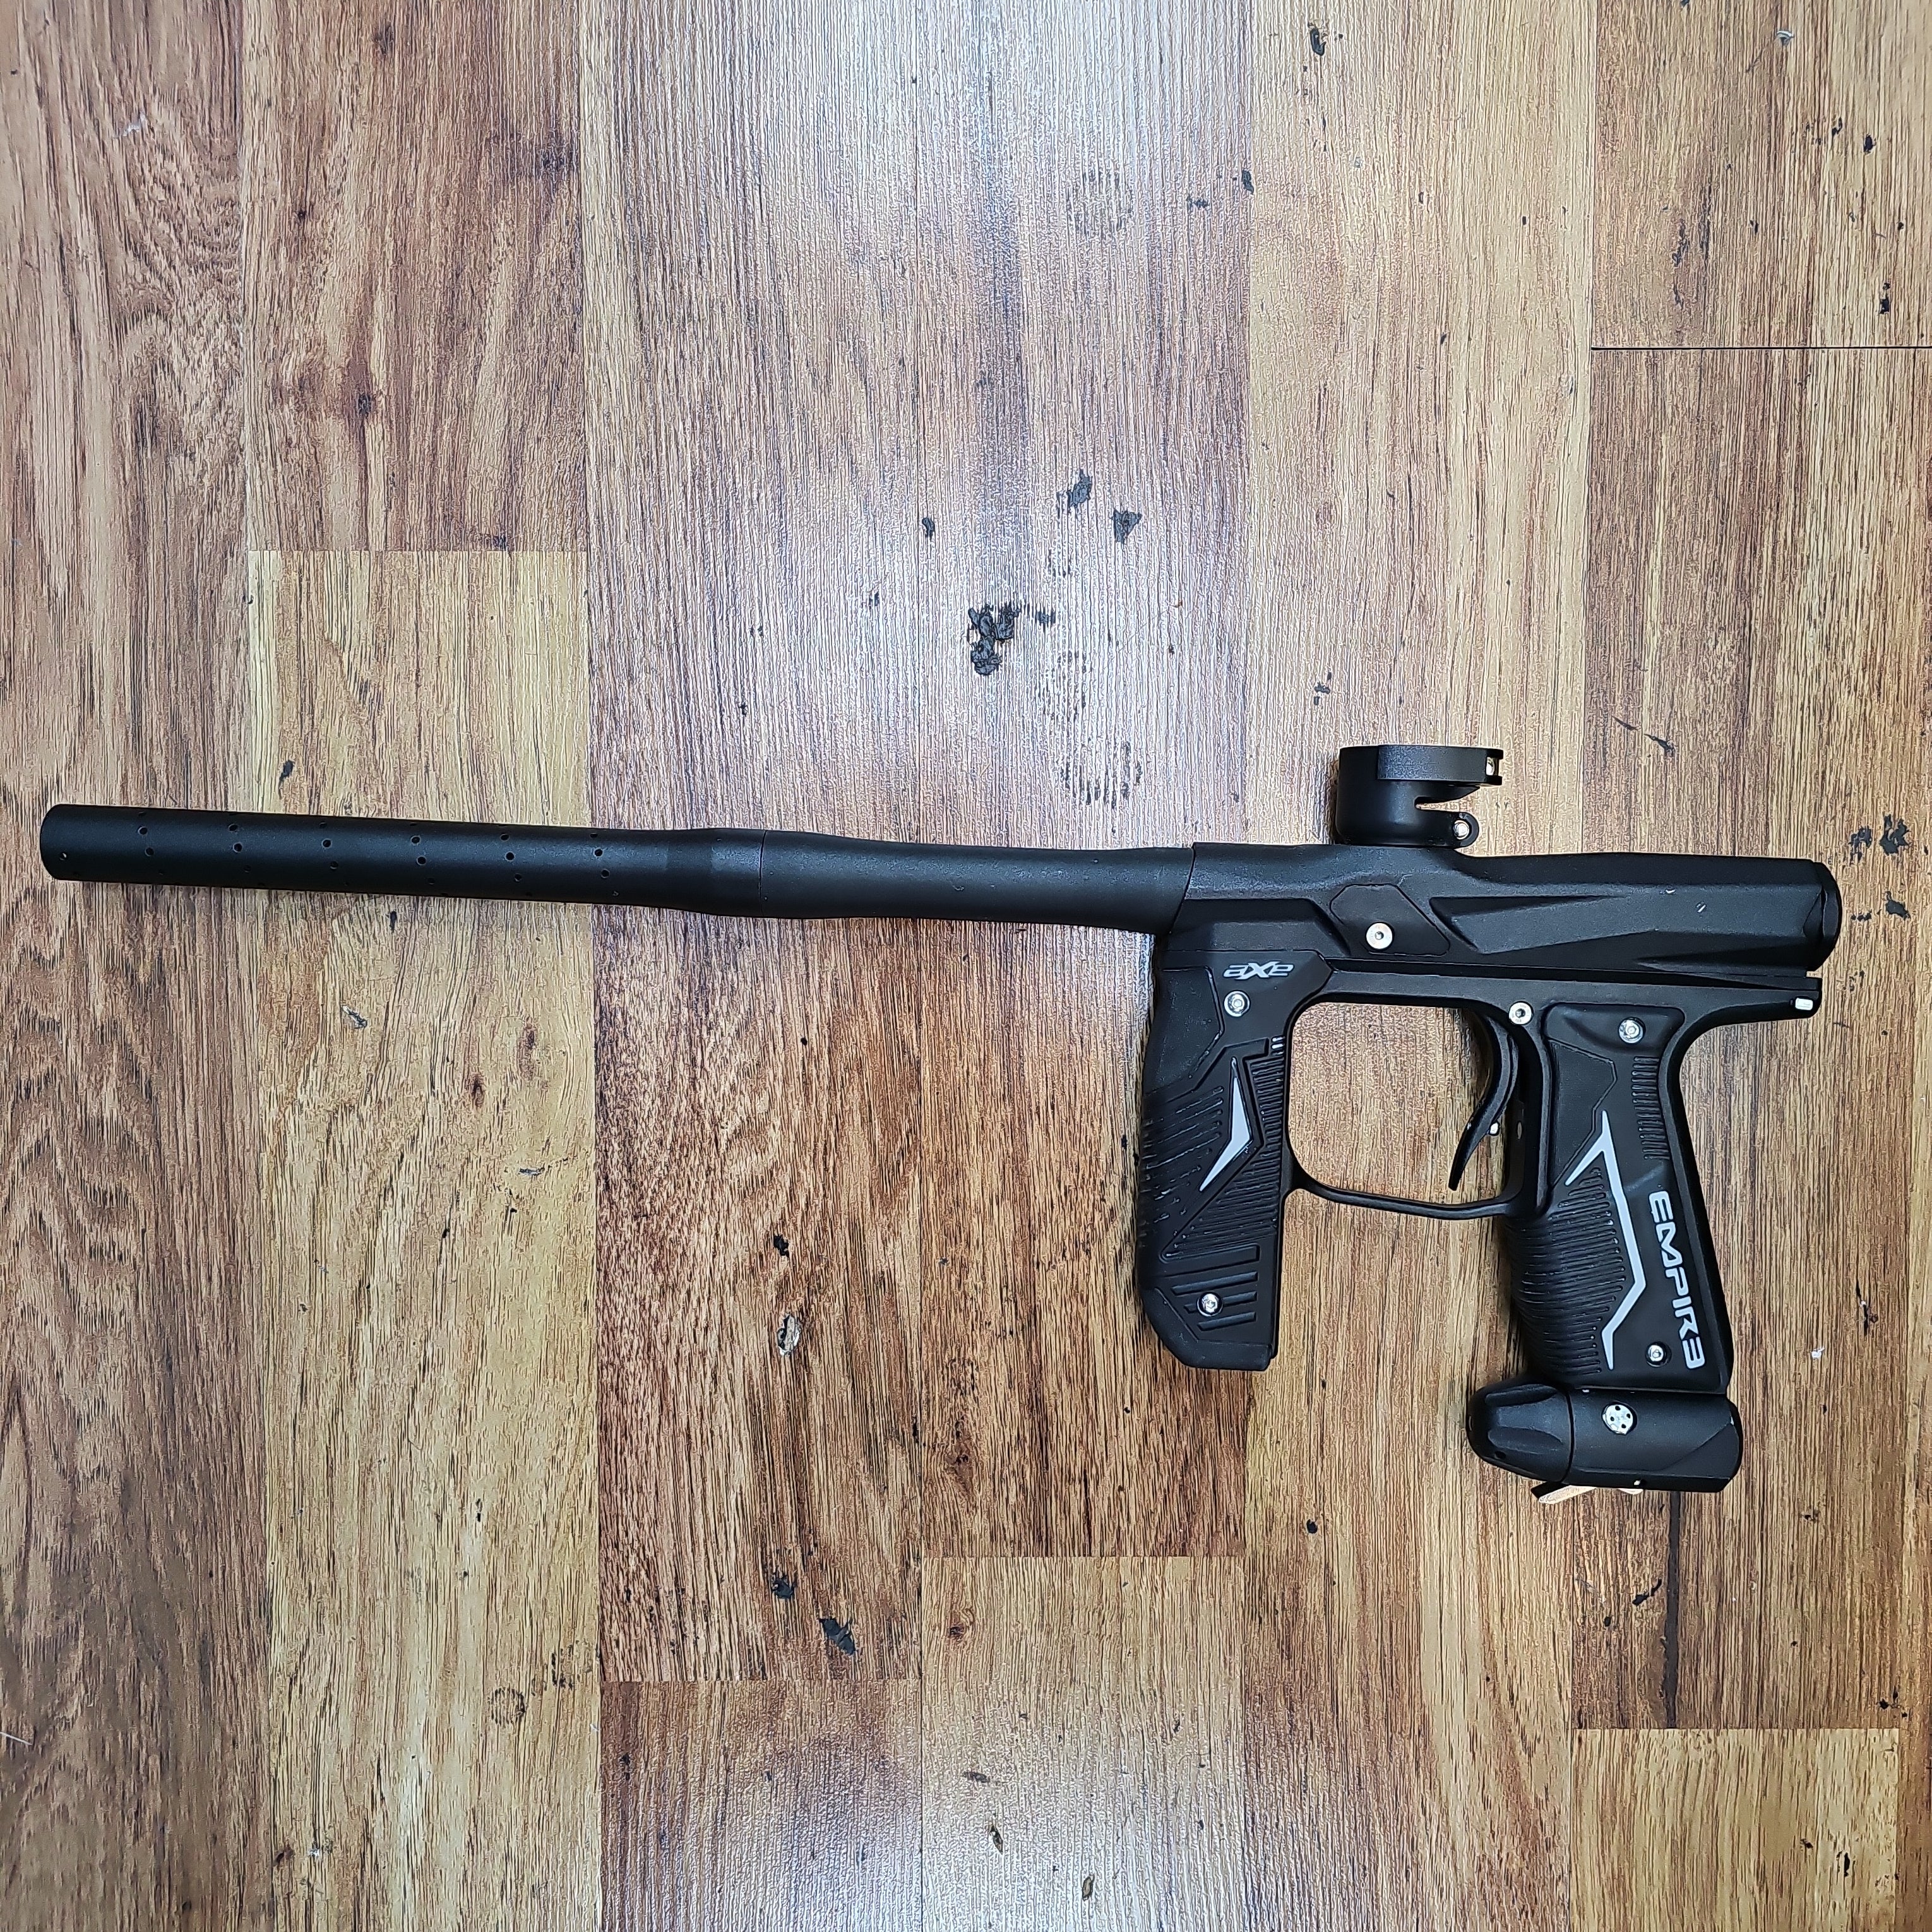 USED - Empire Axe 2.0 - Black - Eminent Paintball And Airsoft